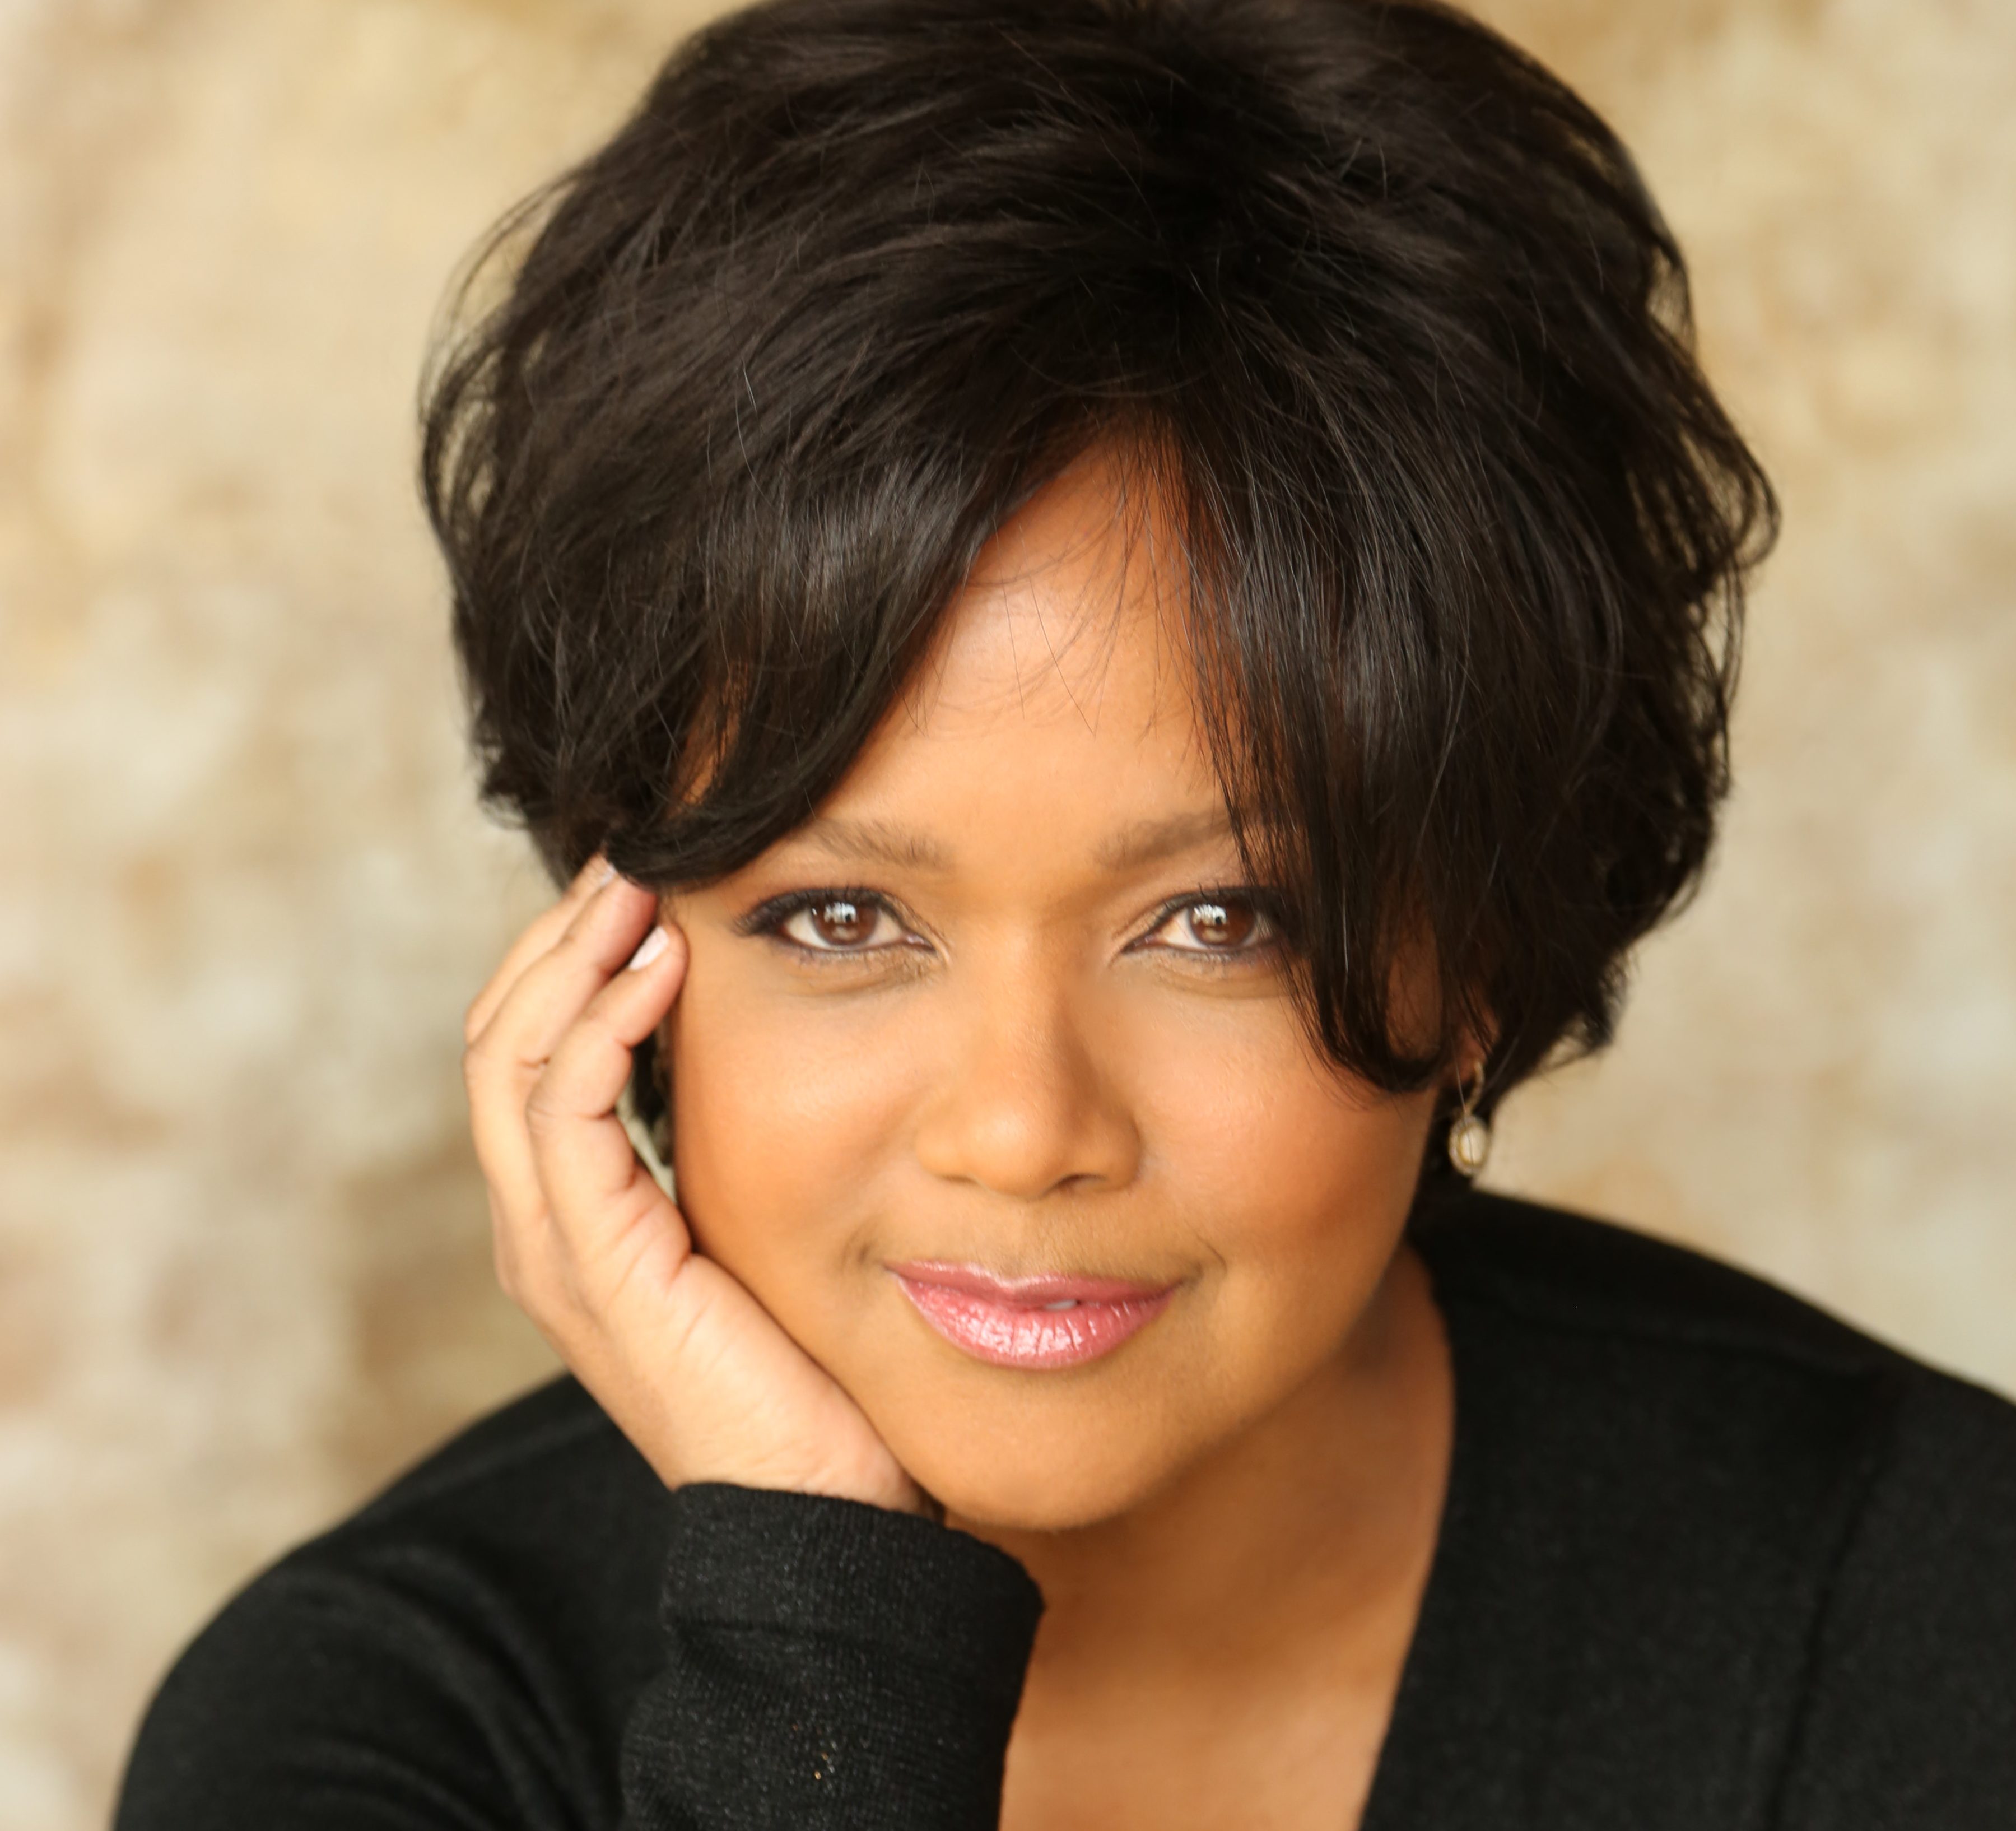 Tonya Williams, former 'Y&R' star, launches Access Reelworld to help  racially diverse Canadians 